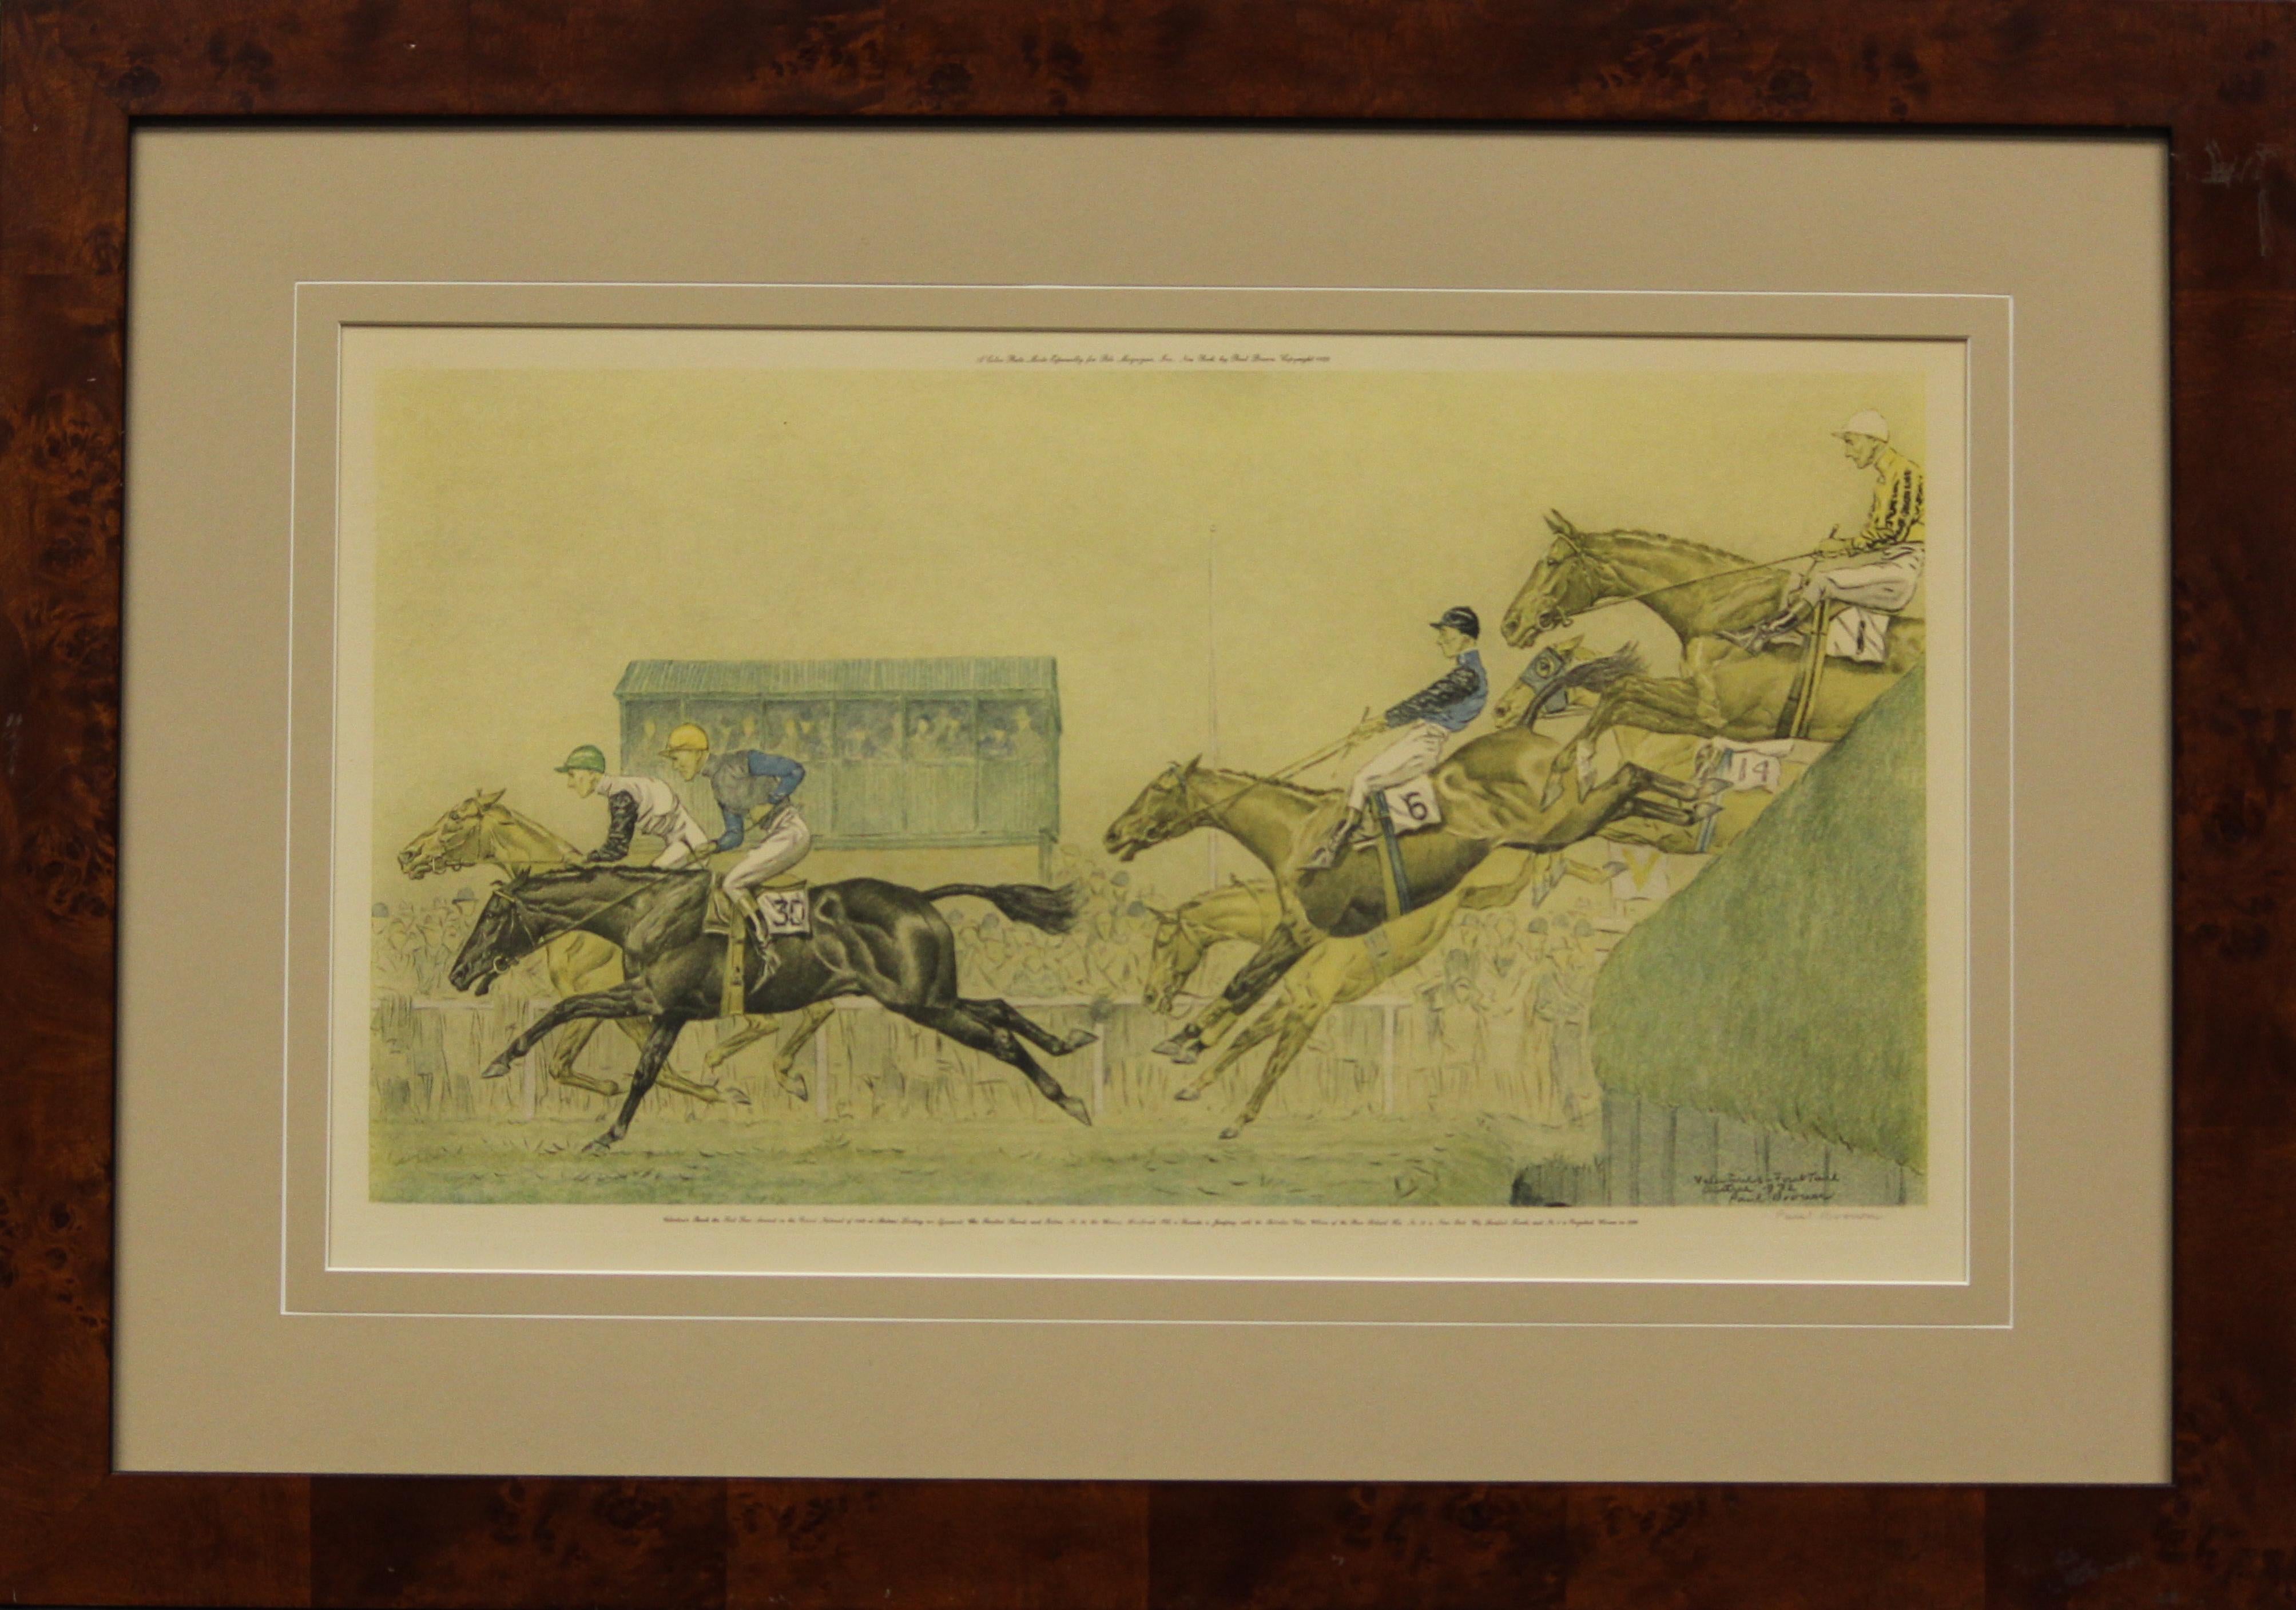 "Valentine's Brook The First Time Around In The Grand National 1932 At Aintree" - Print by Paul Brown